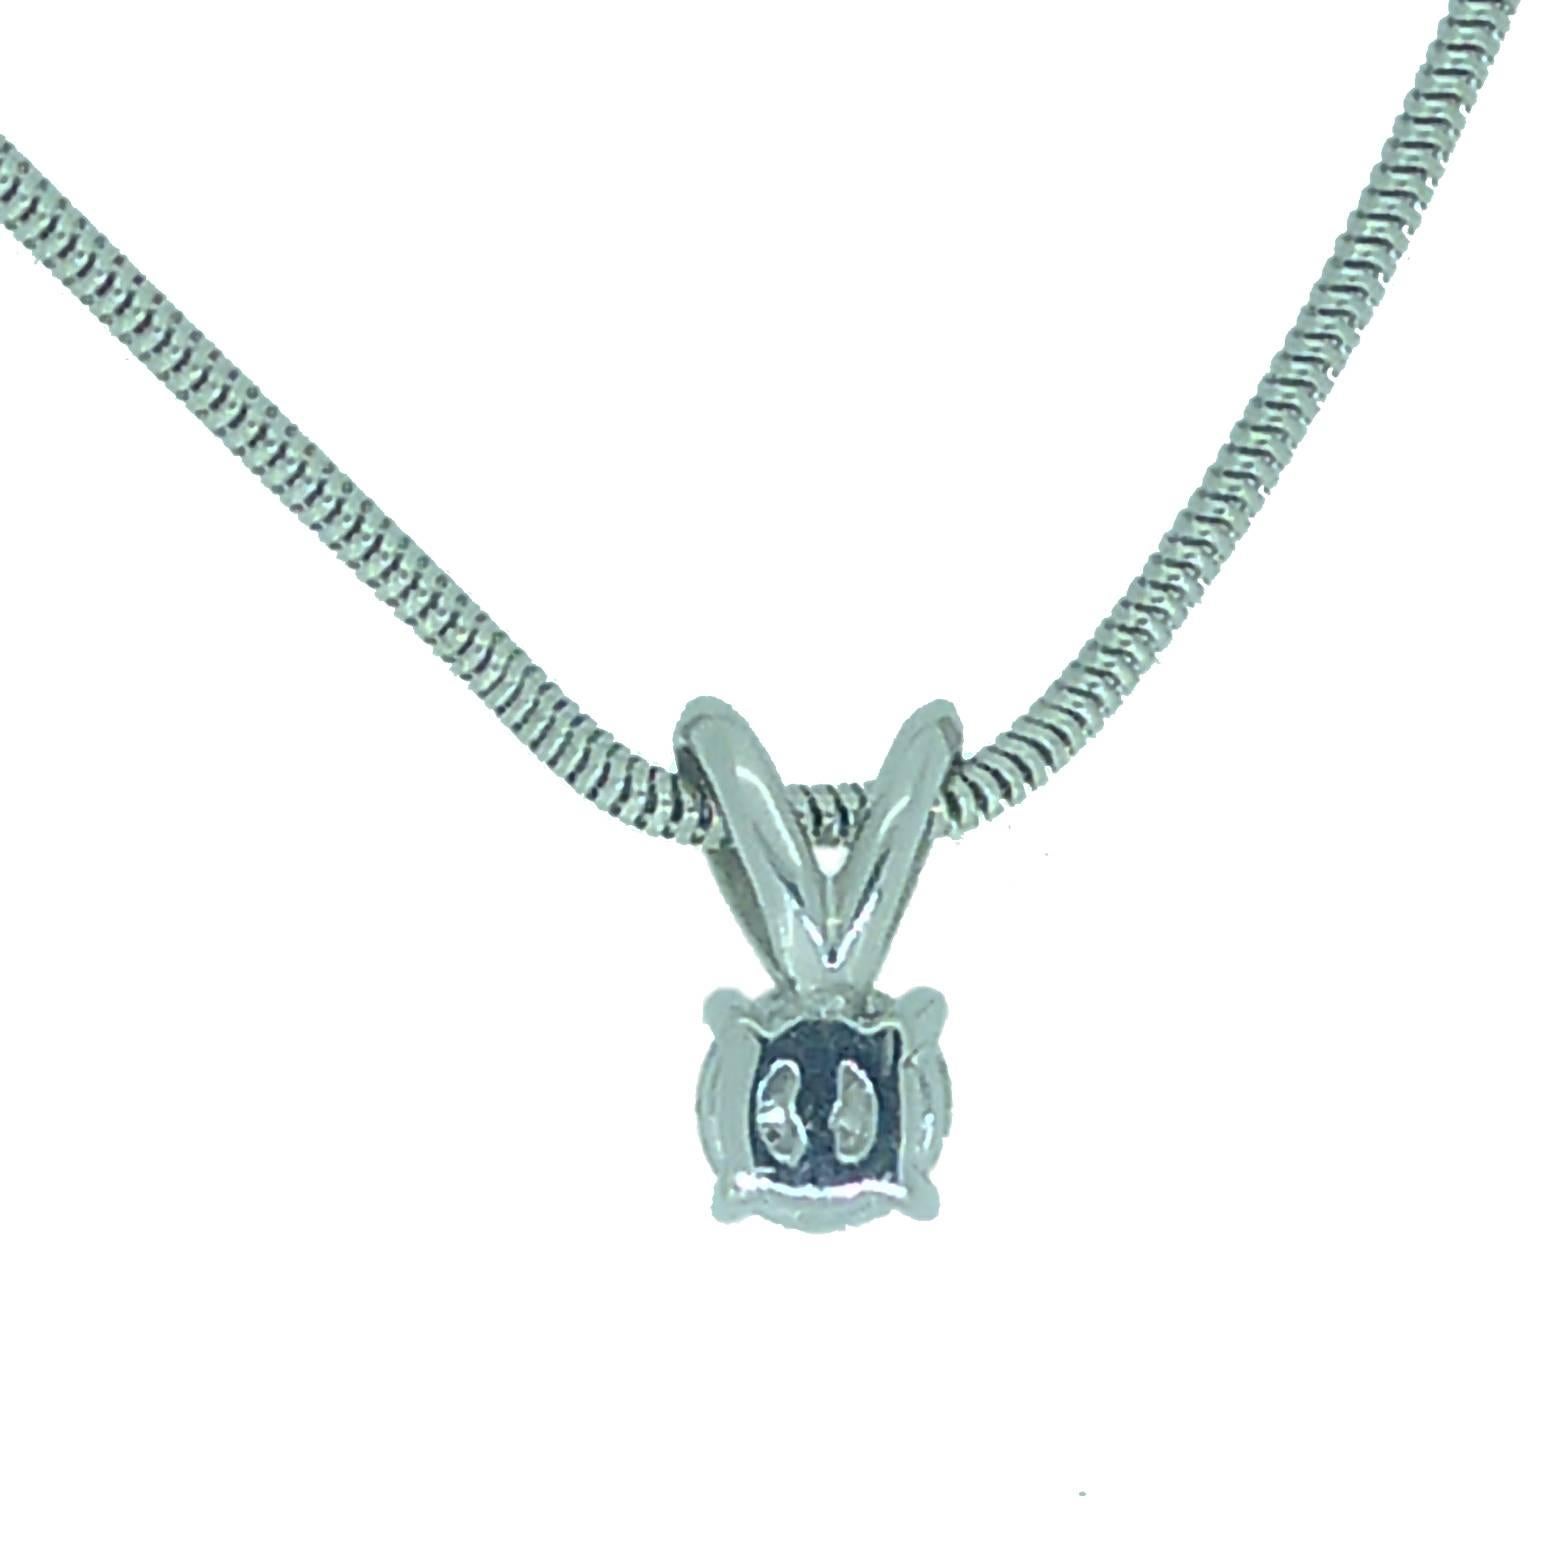 Vintage 0.65 Carat Diamond Solitaire Necklace with 18 Carat White Gold Chain 1